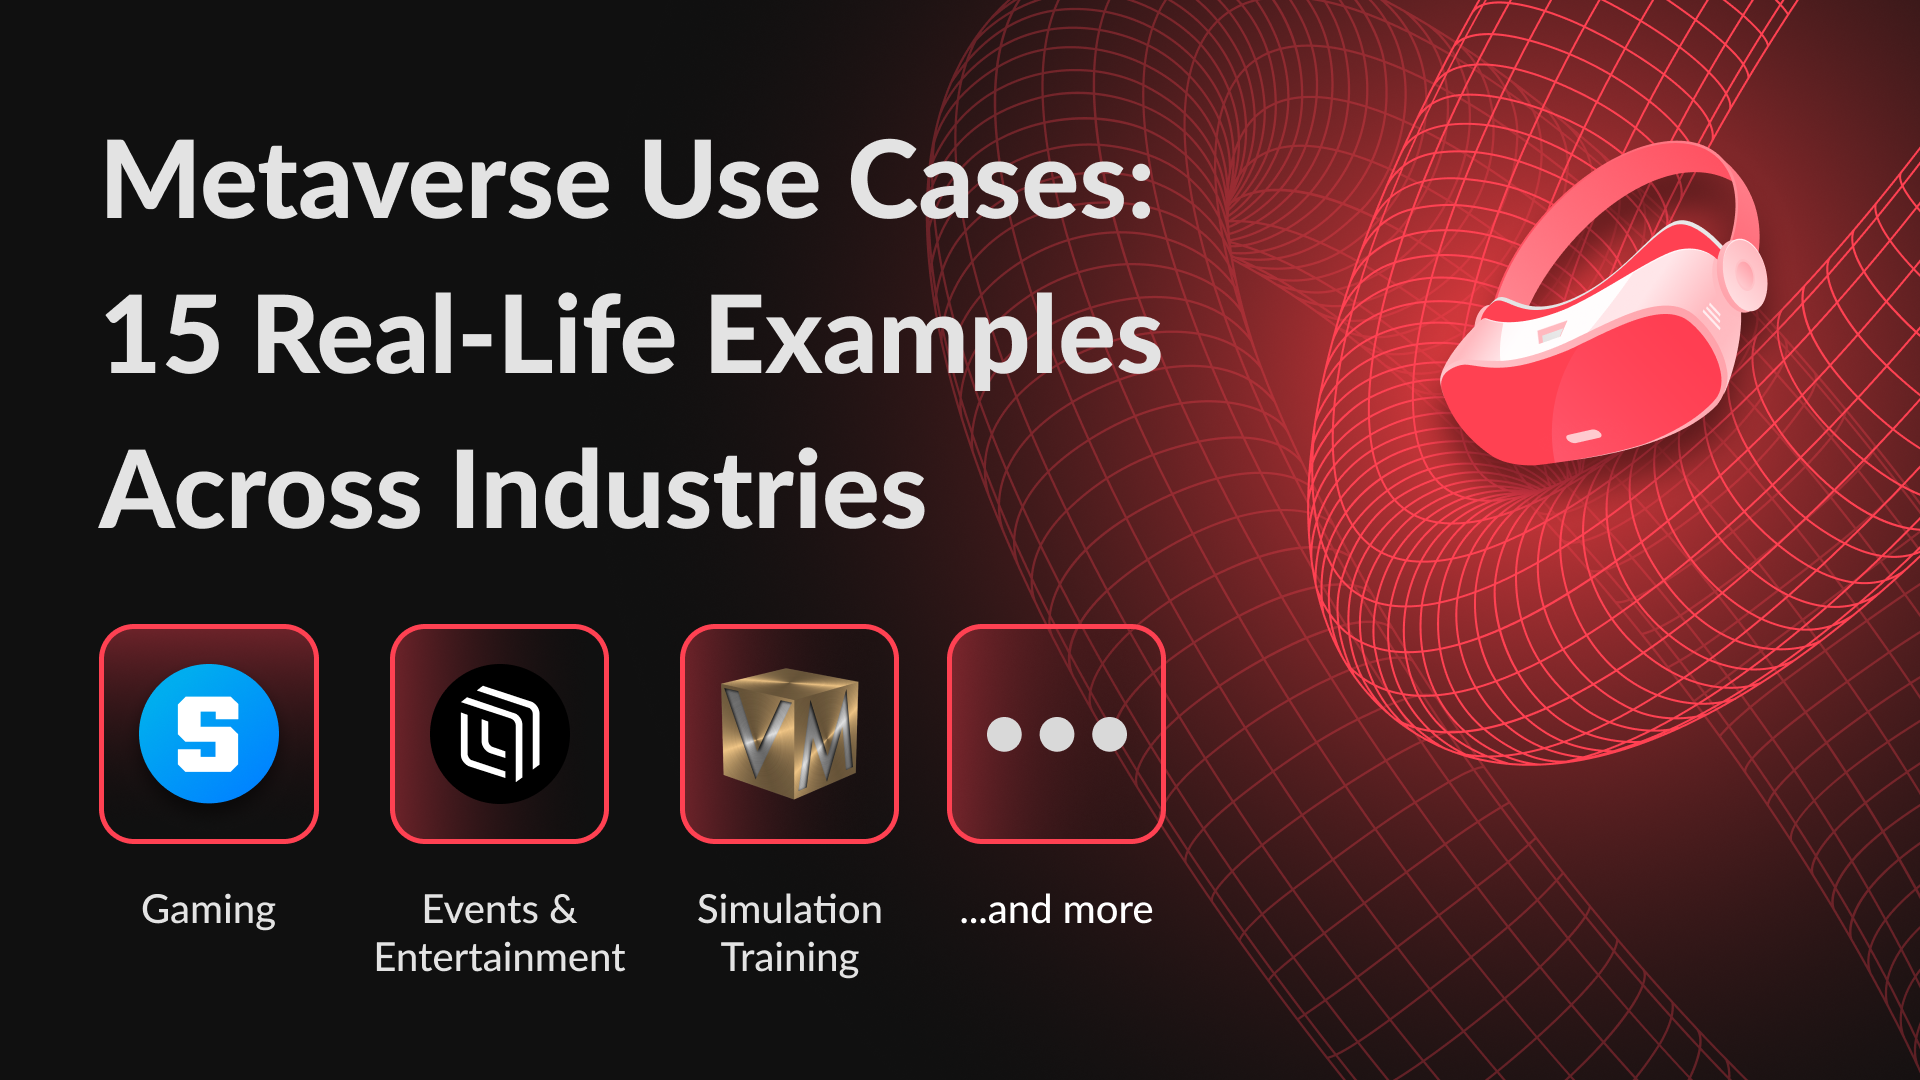 Metaverse Use Cases: 15 Real-Life Examples Across Industries